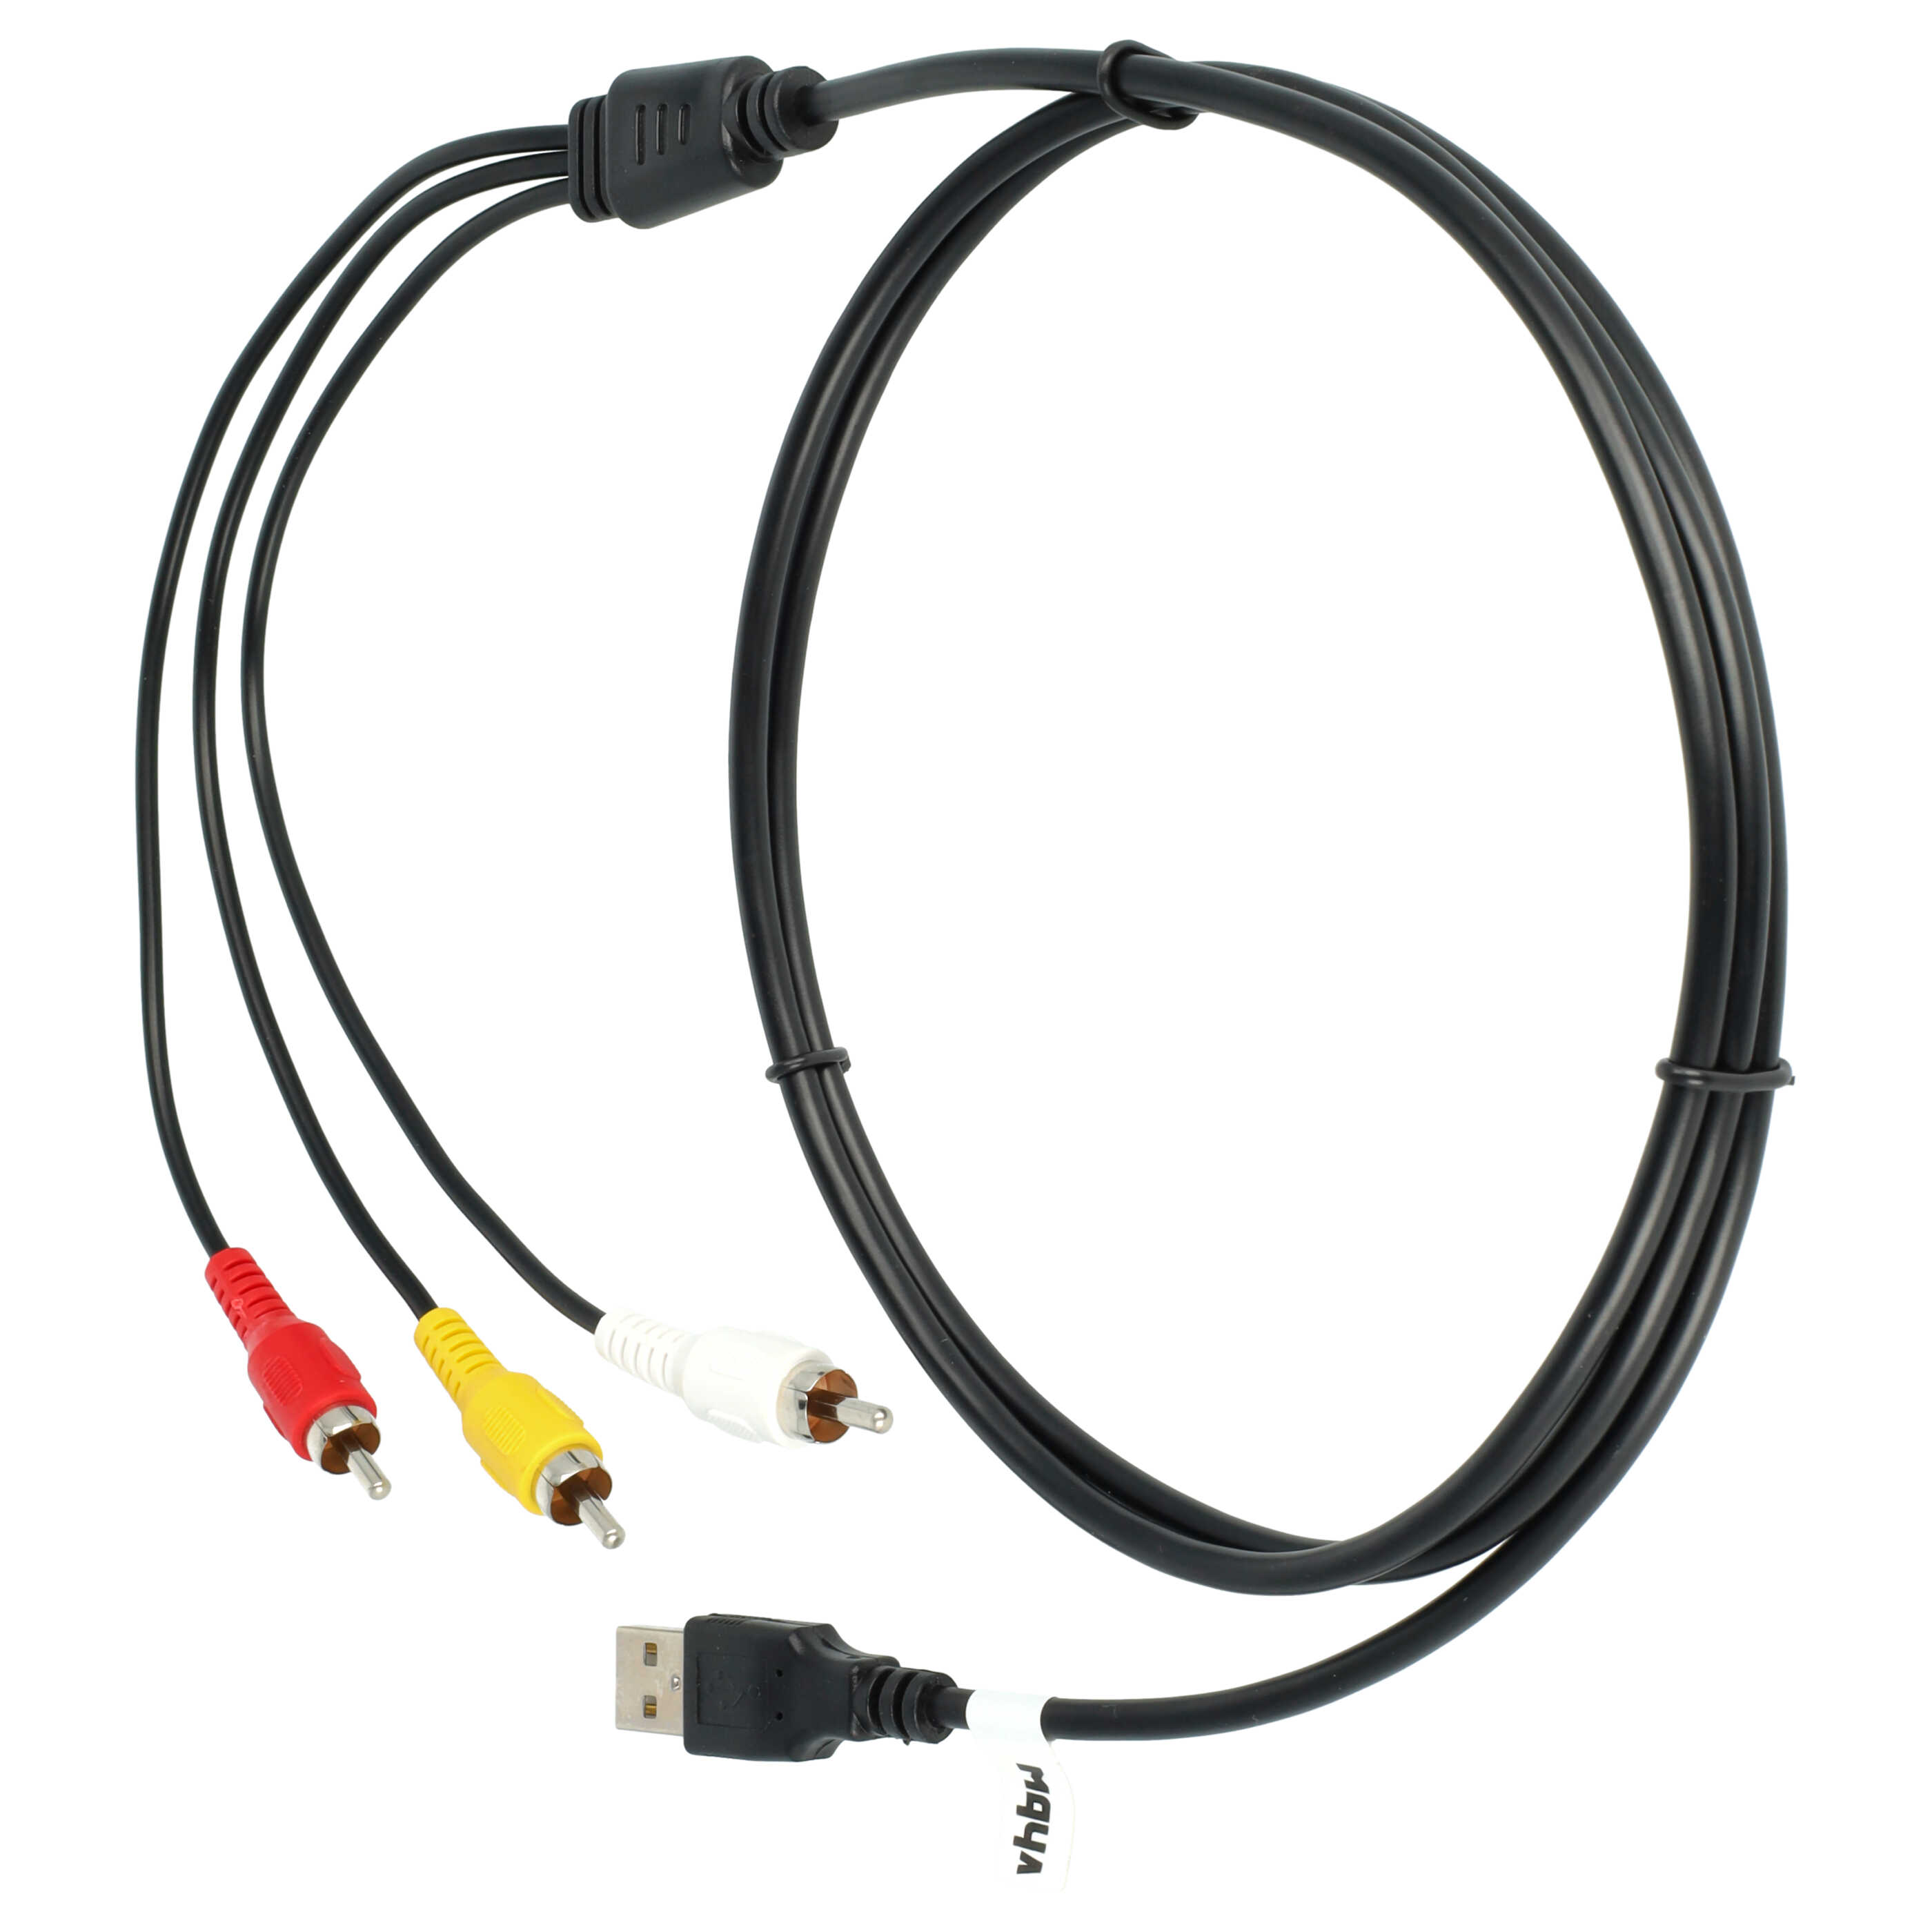 vhbw 3-RCA USB Cable, AV Cable compatible with HDD-Players, AV Stereo Sound Systems - Triple RCA to USB A 2.0,